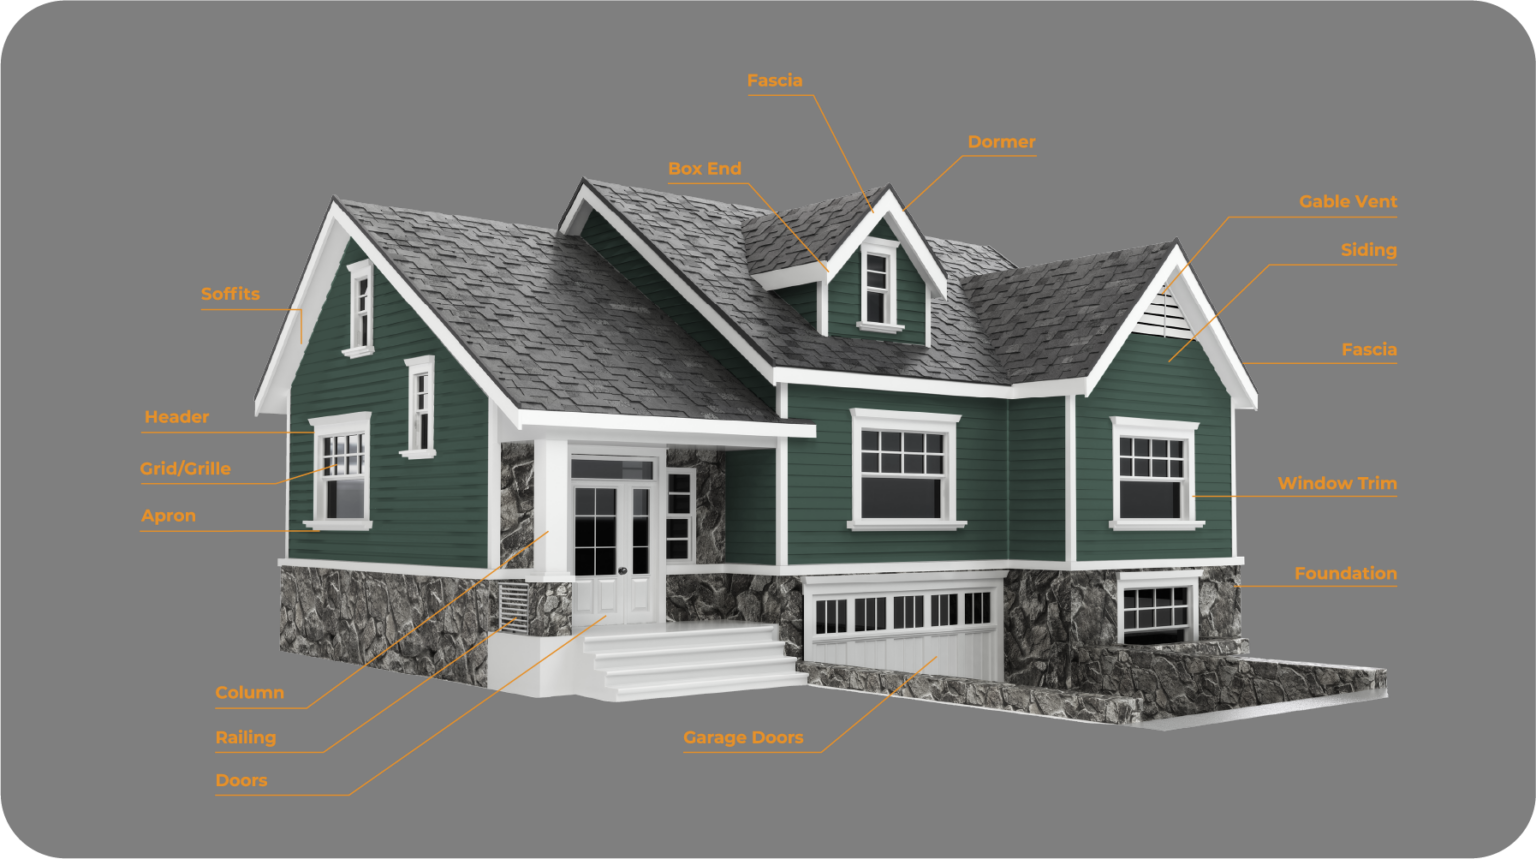 Home exterior rendering with callout text designating the areas that greenhaus paints: Soffits, headers, grids/grilles, aprons, columns, railings, doors, garage doors, box ends, fascia, dormer, gable vent, siding, window trim, and foundations